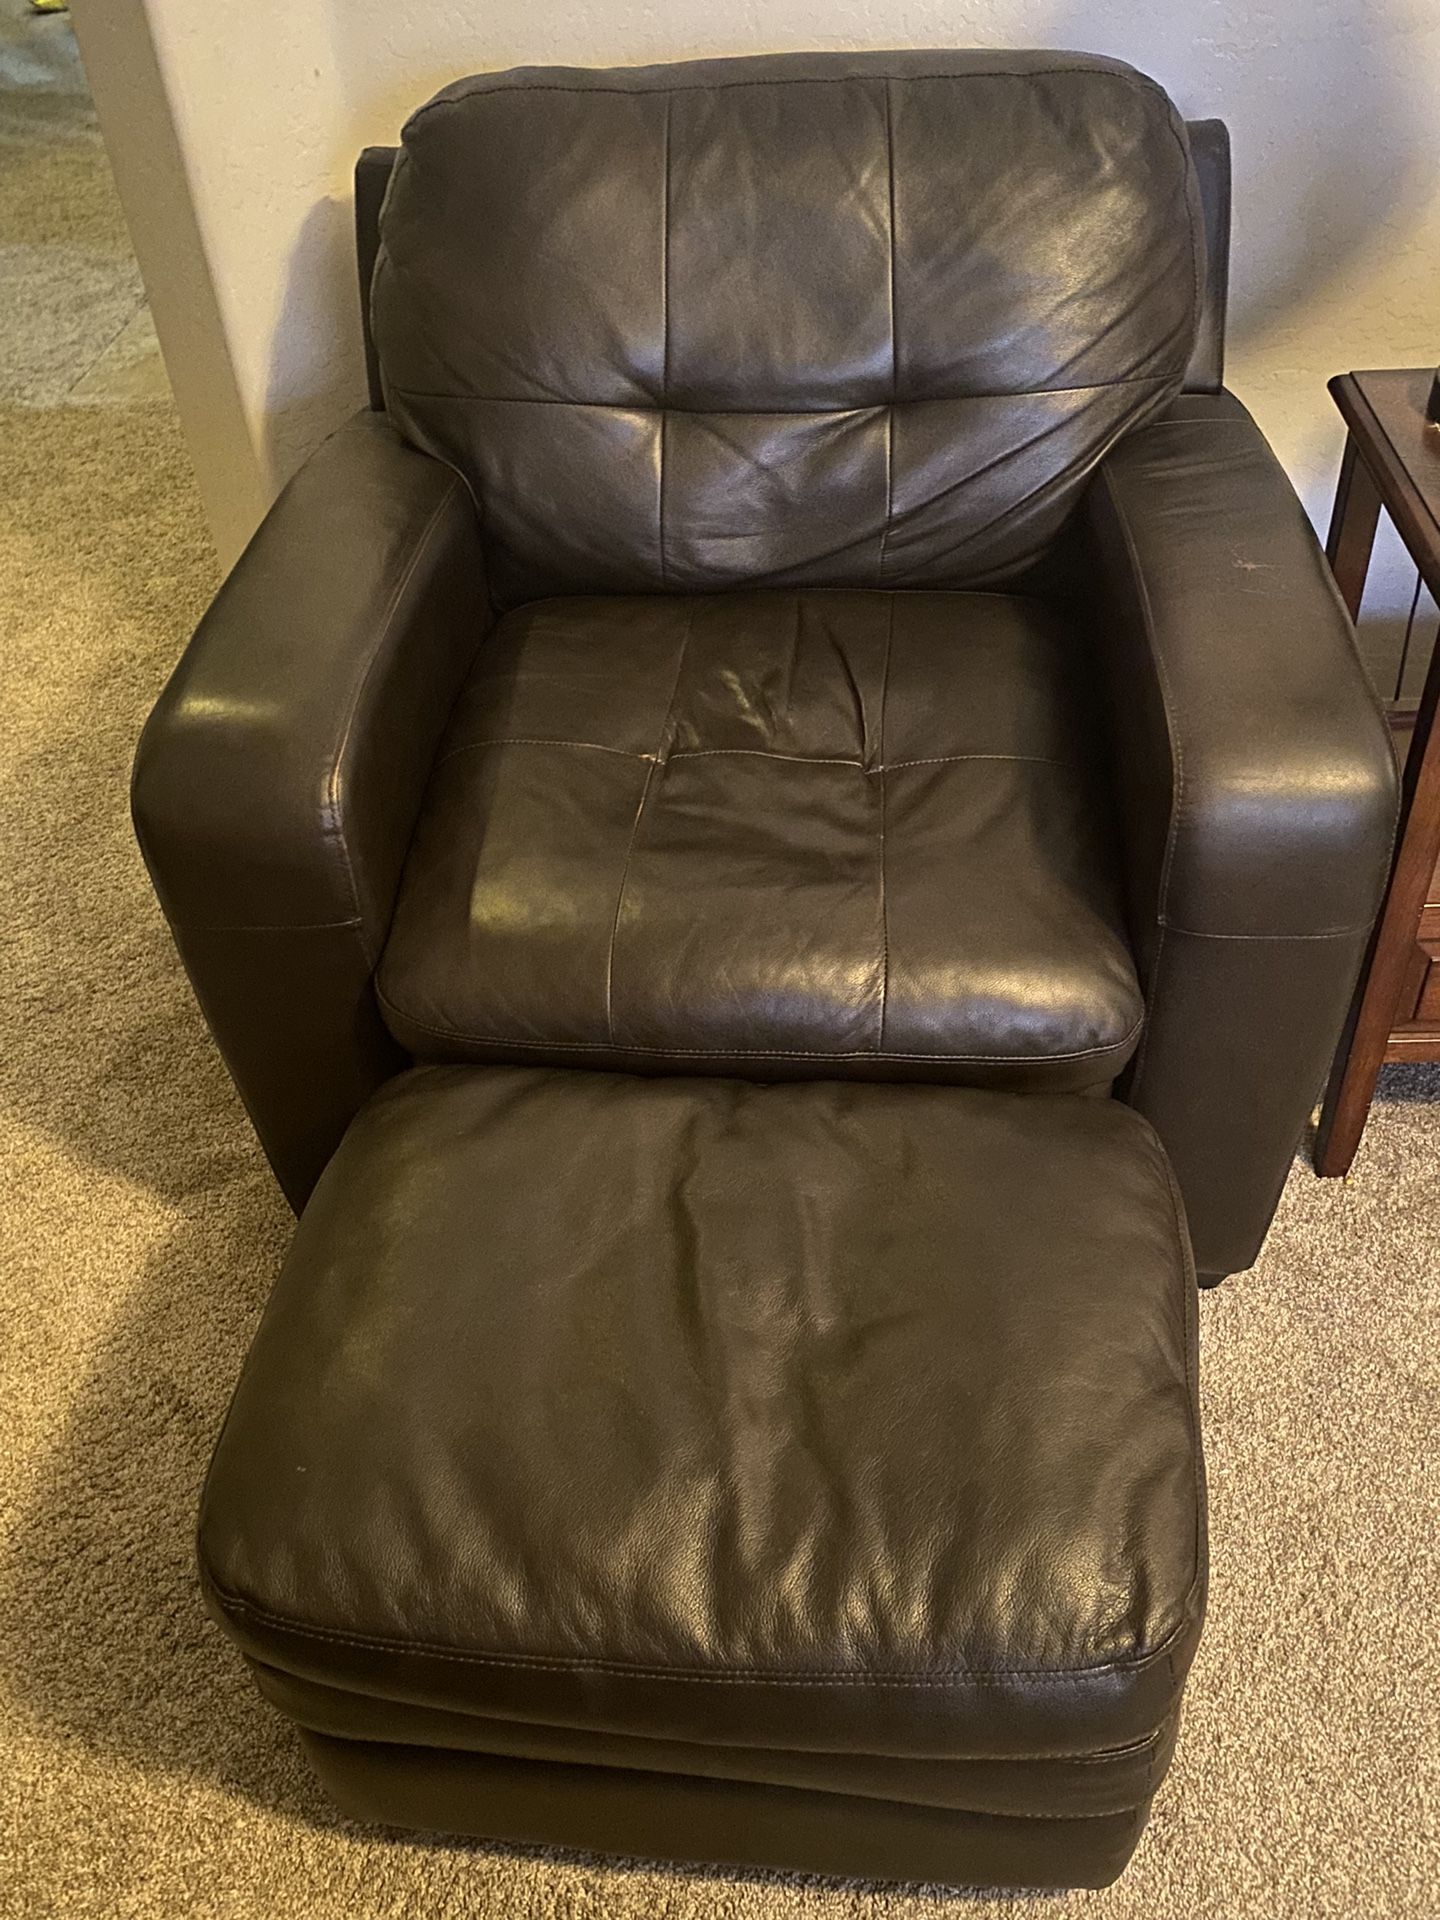 Two Matching Chairs With Ottoman - $35 For Both 